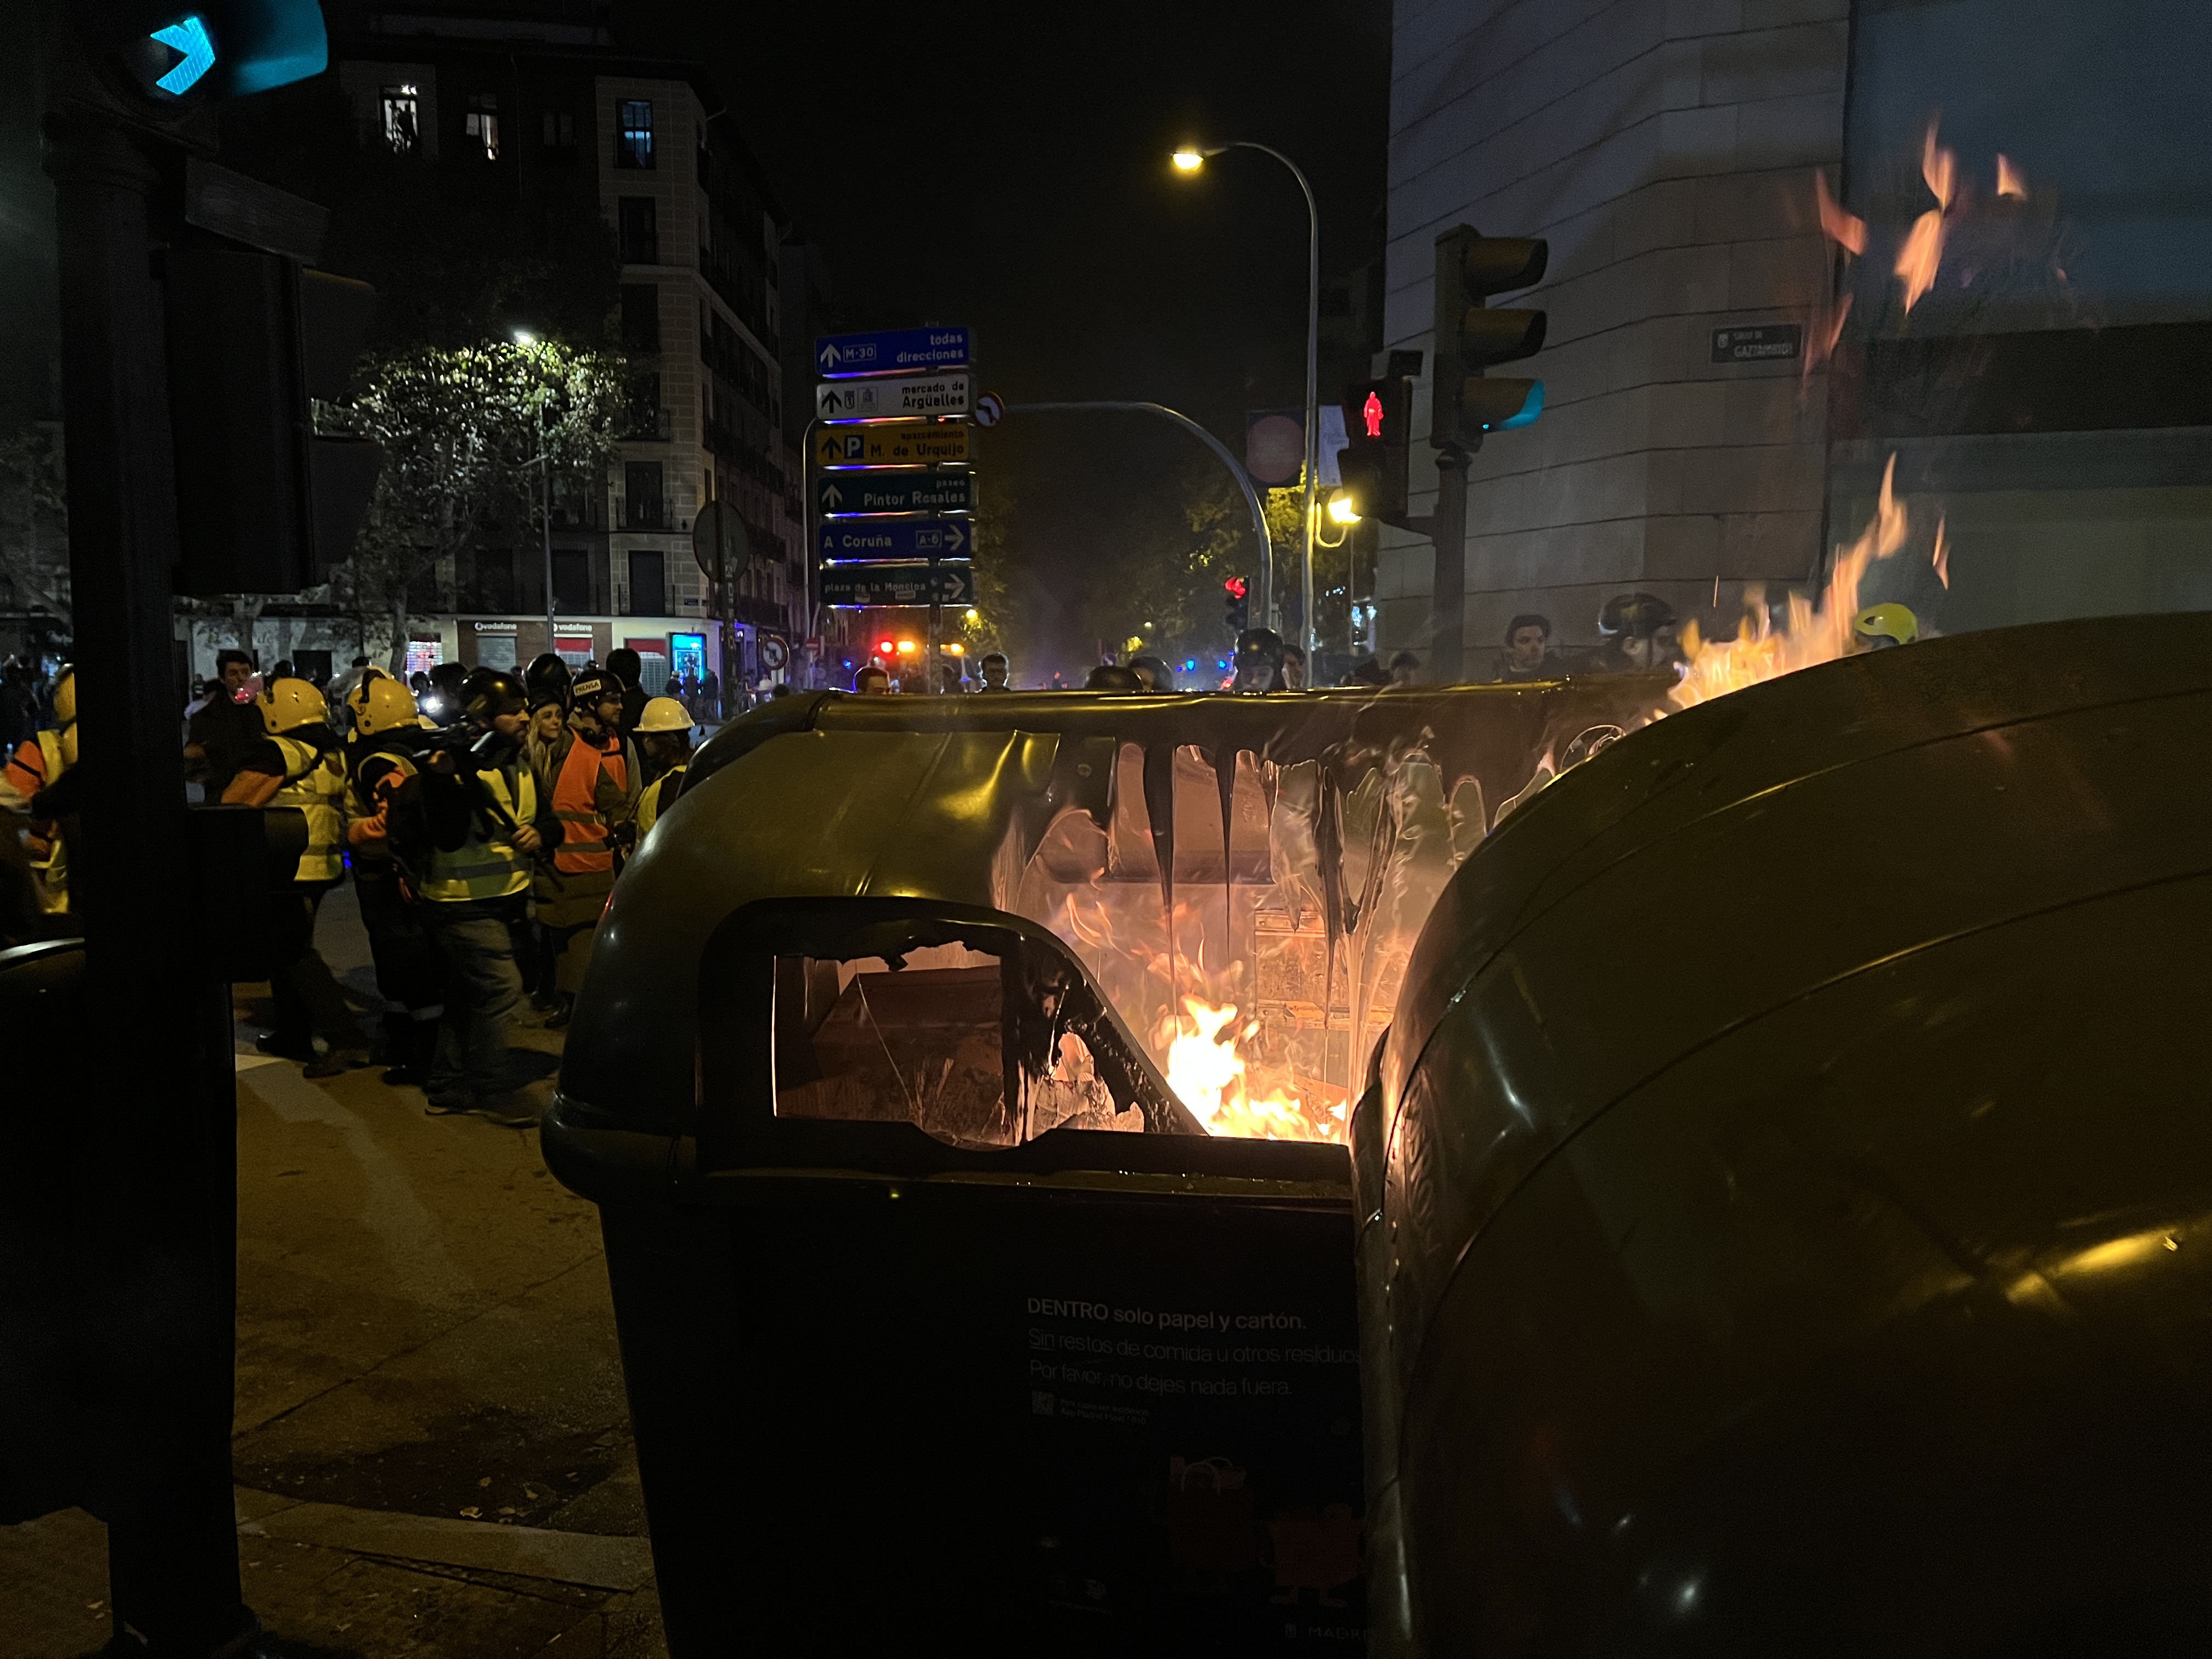 A burning dumpster during the protest